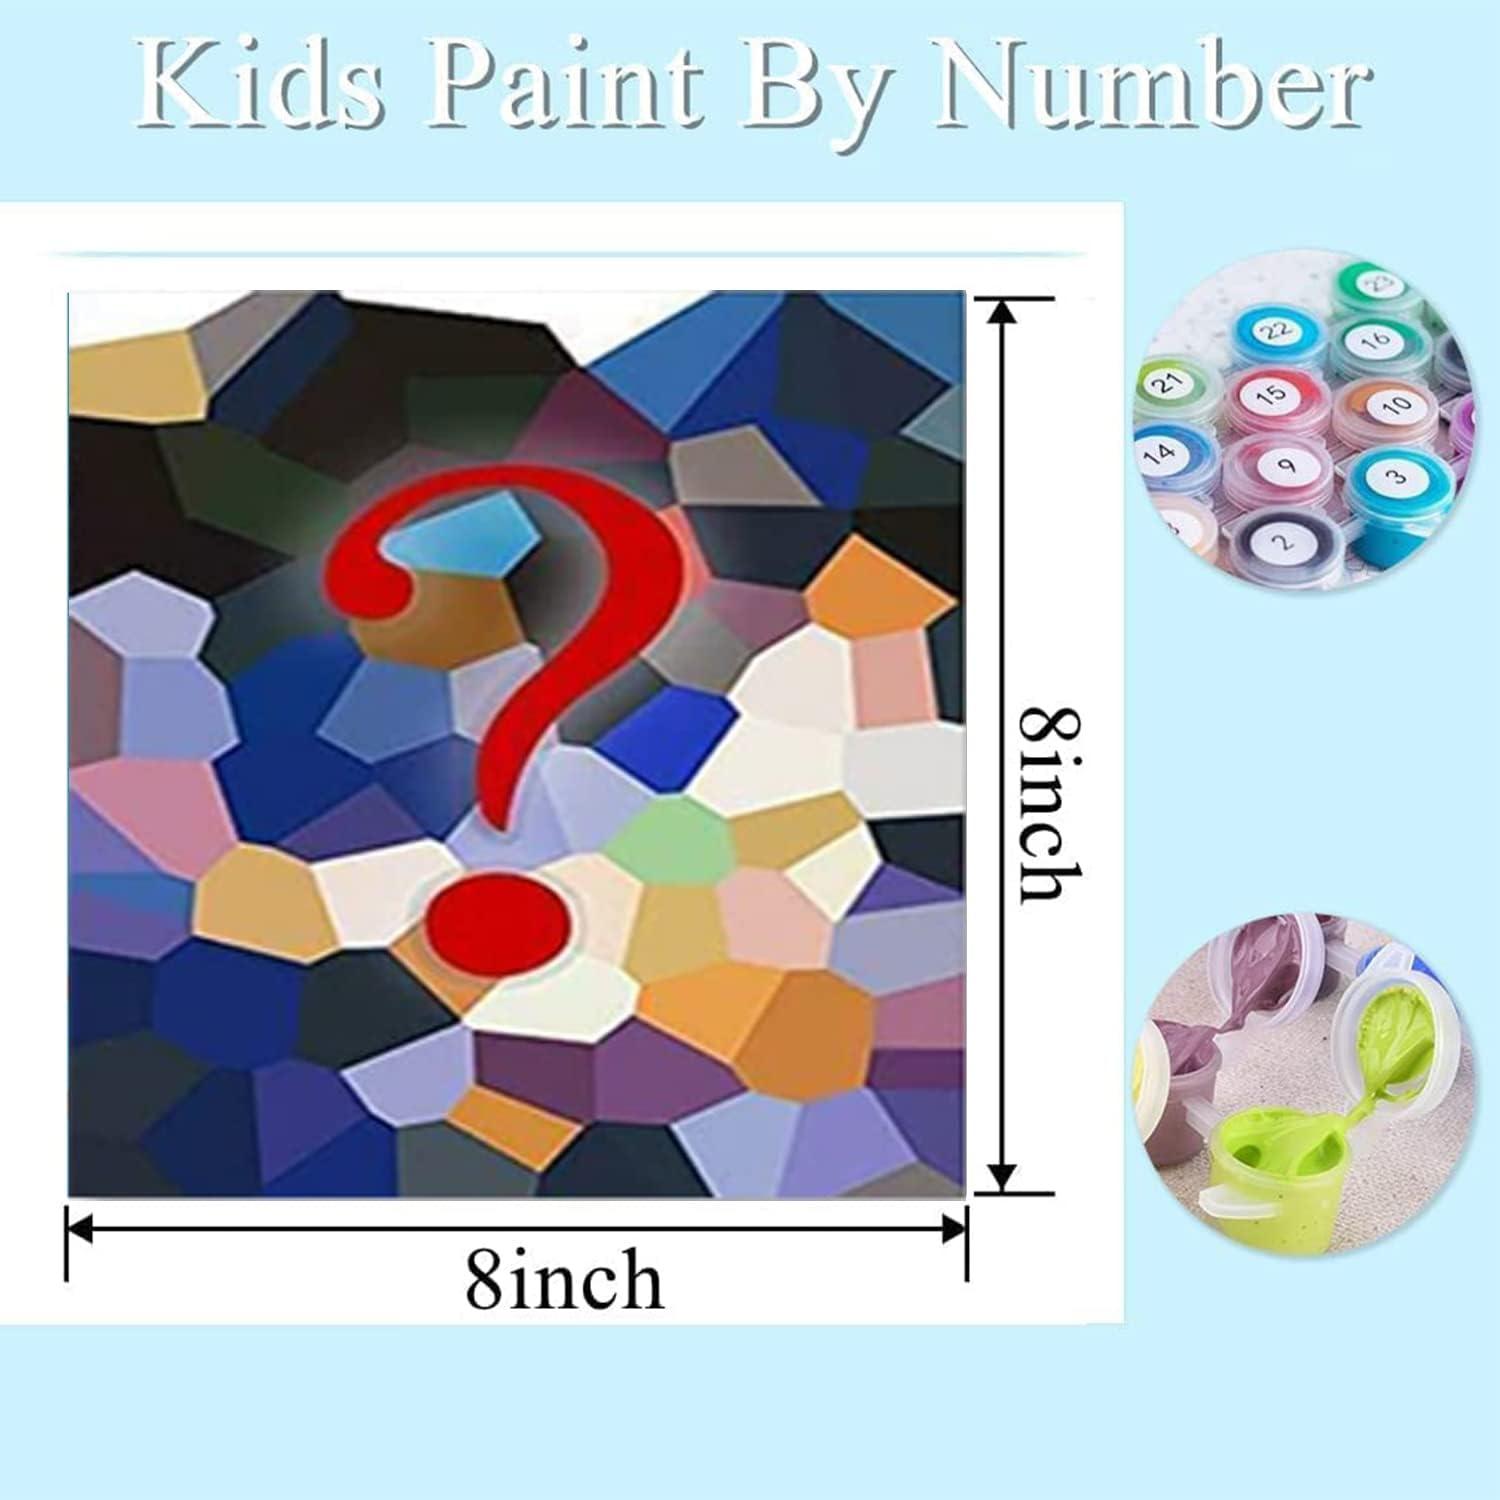 4 Paint by Numbers for Kids Ages 8-12 DIY Paint Set for Girls Boys